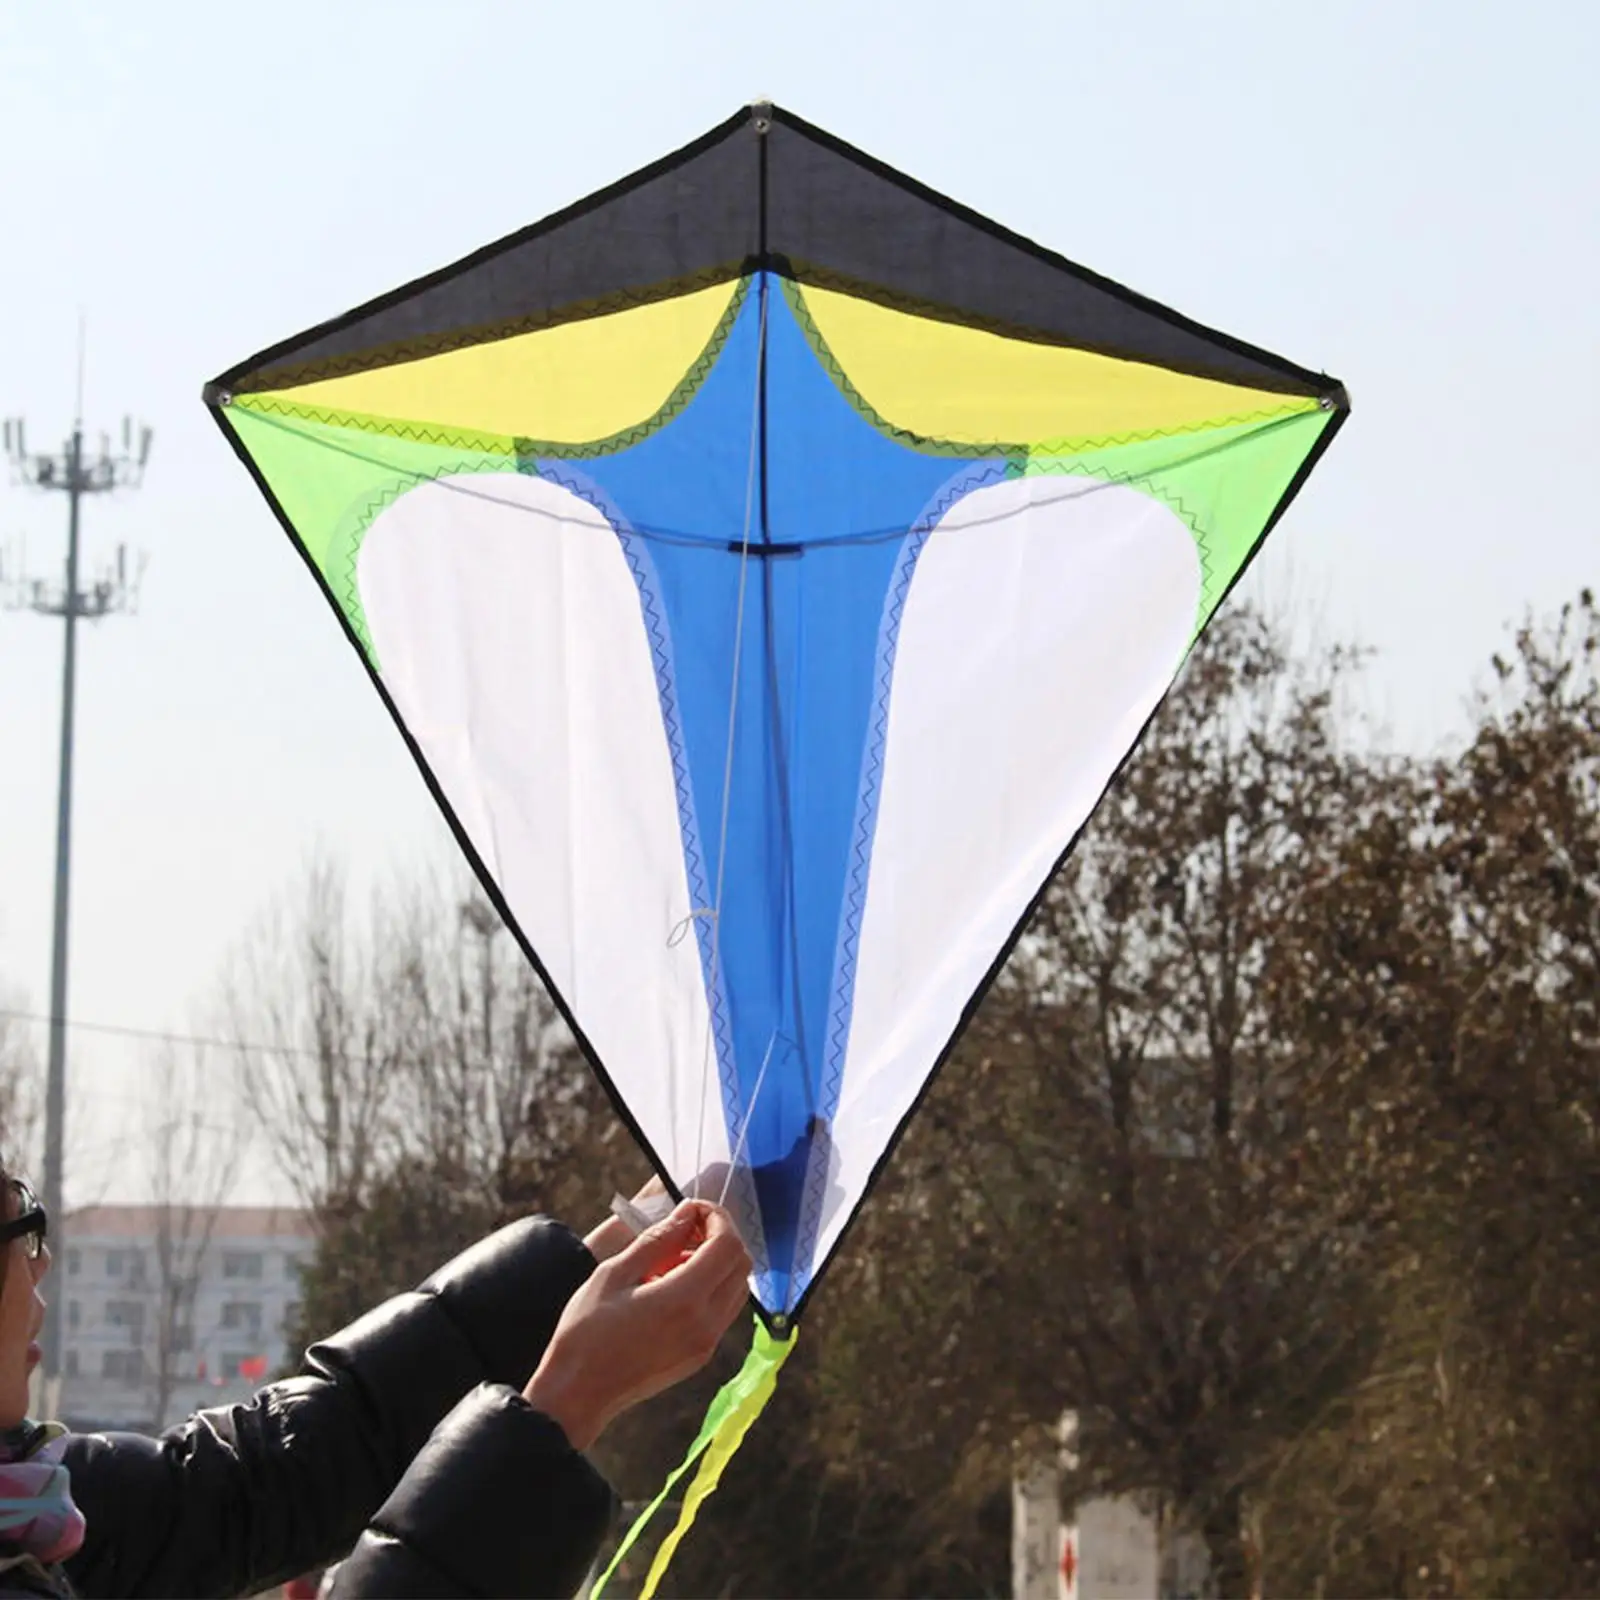 Rainbow Rhombus Kite Fly Kites with Tail Easy to Fly Durable Toys for Family Outdoor Activities Childhood Memories Garden Sports